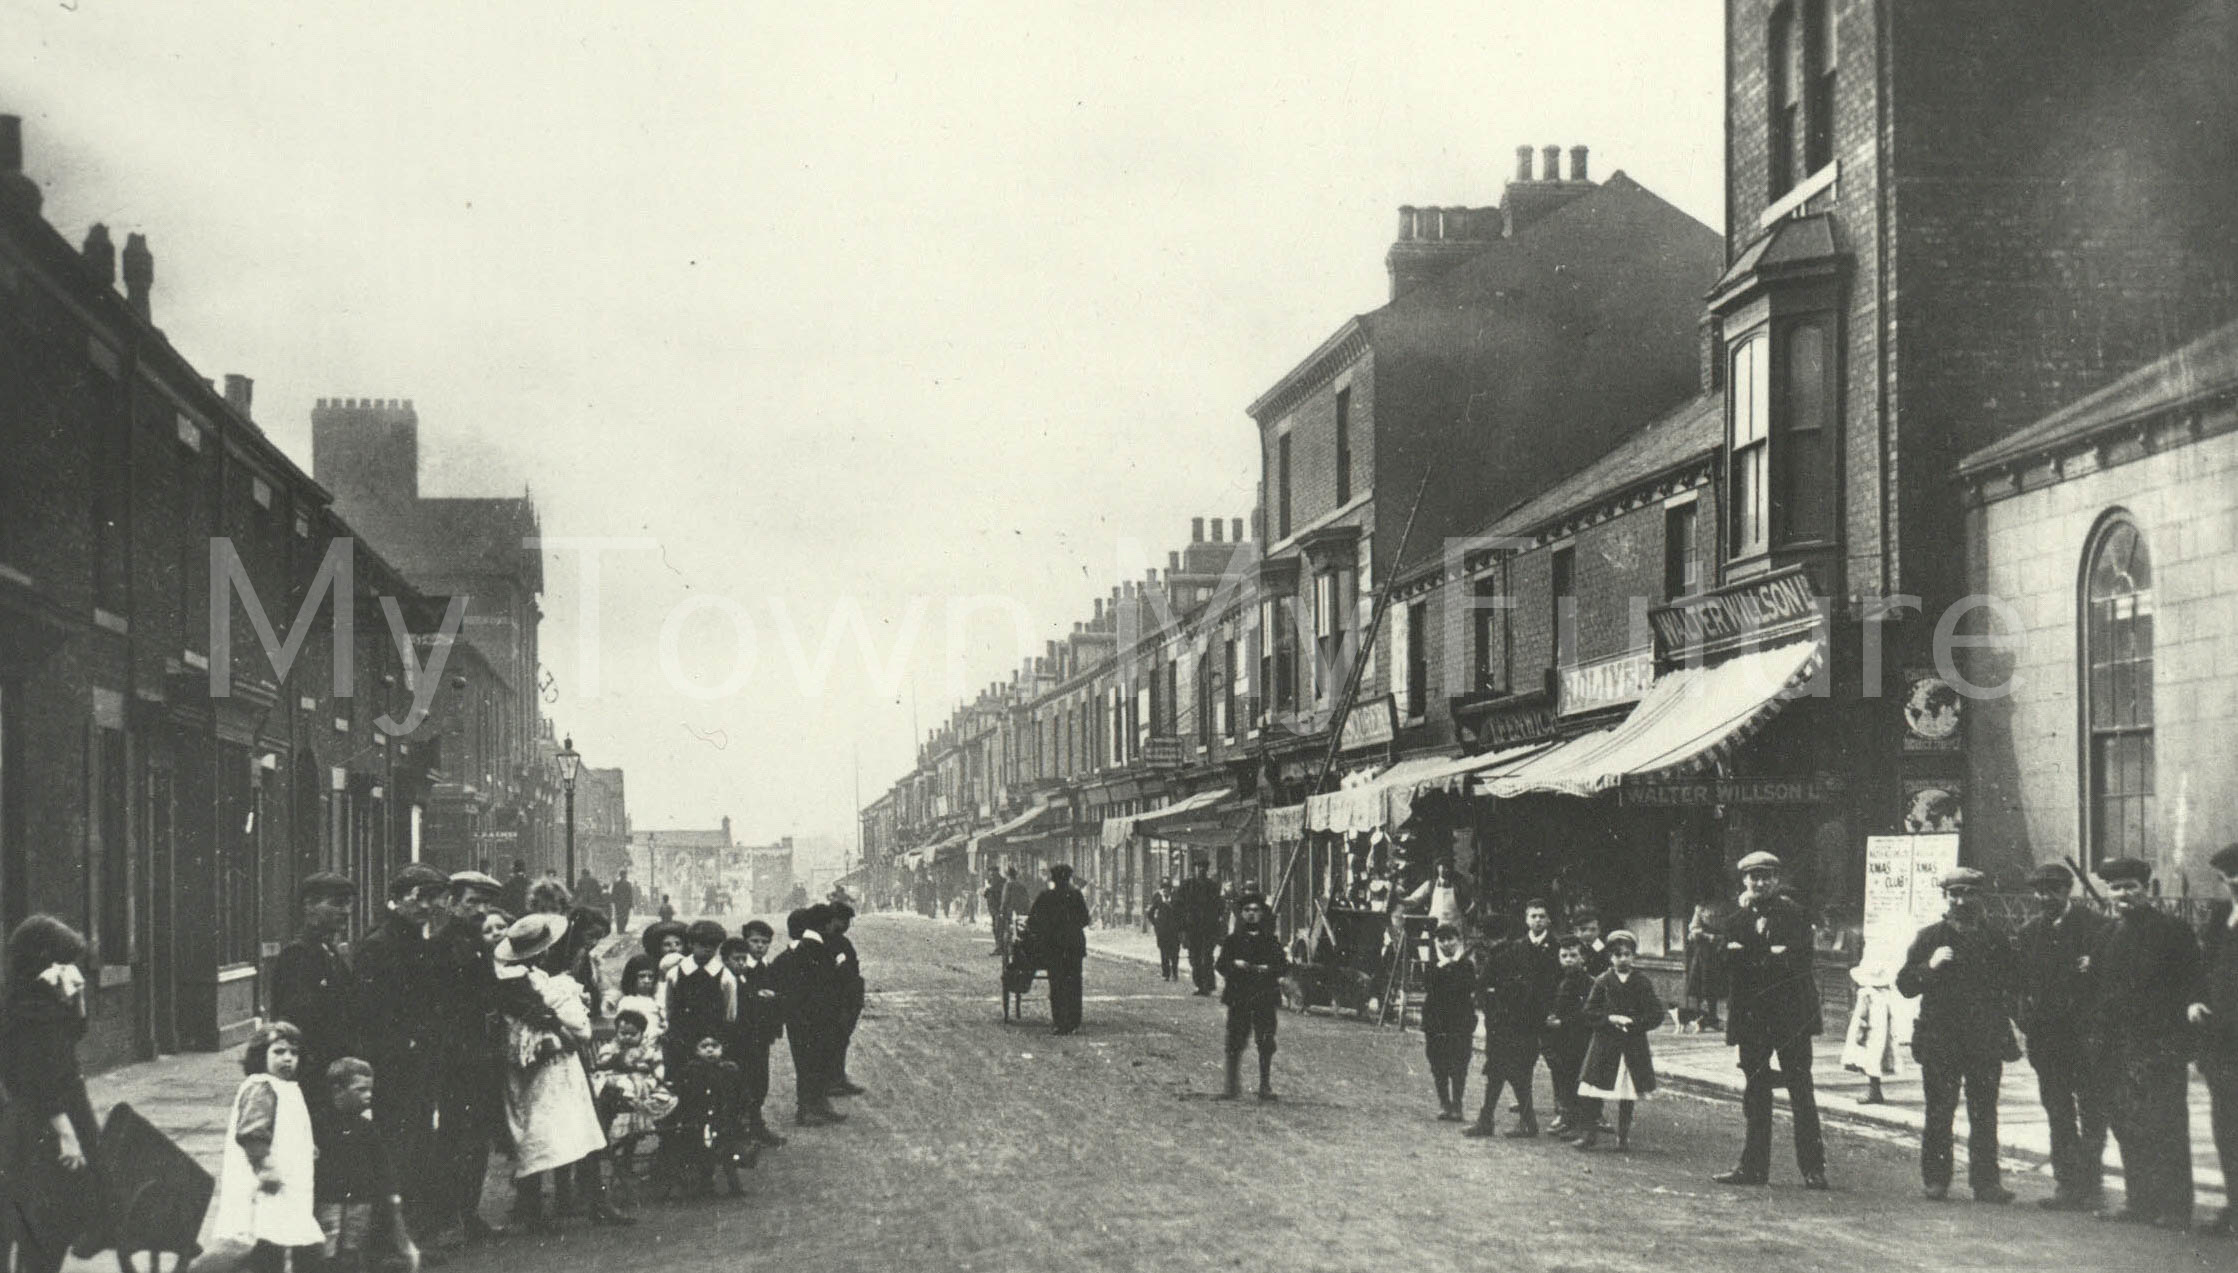 Undated postcard of Smeaton Street, North Ormesby